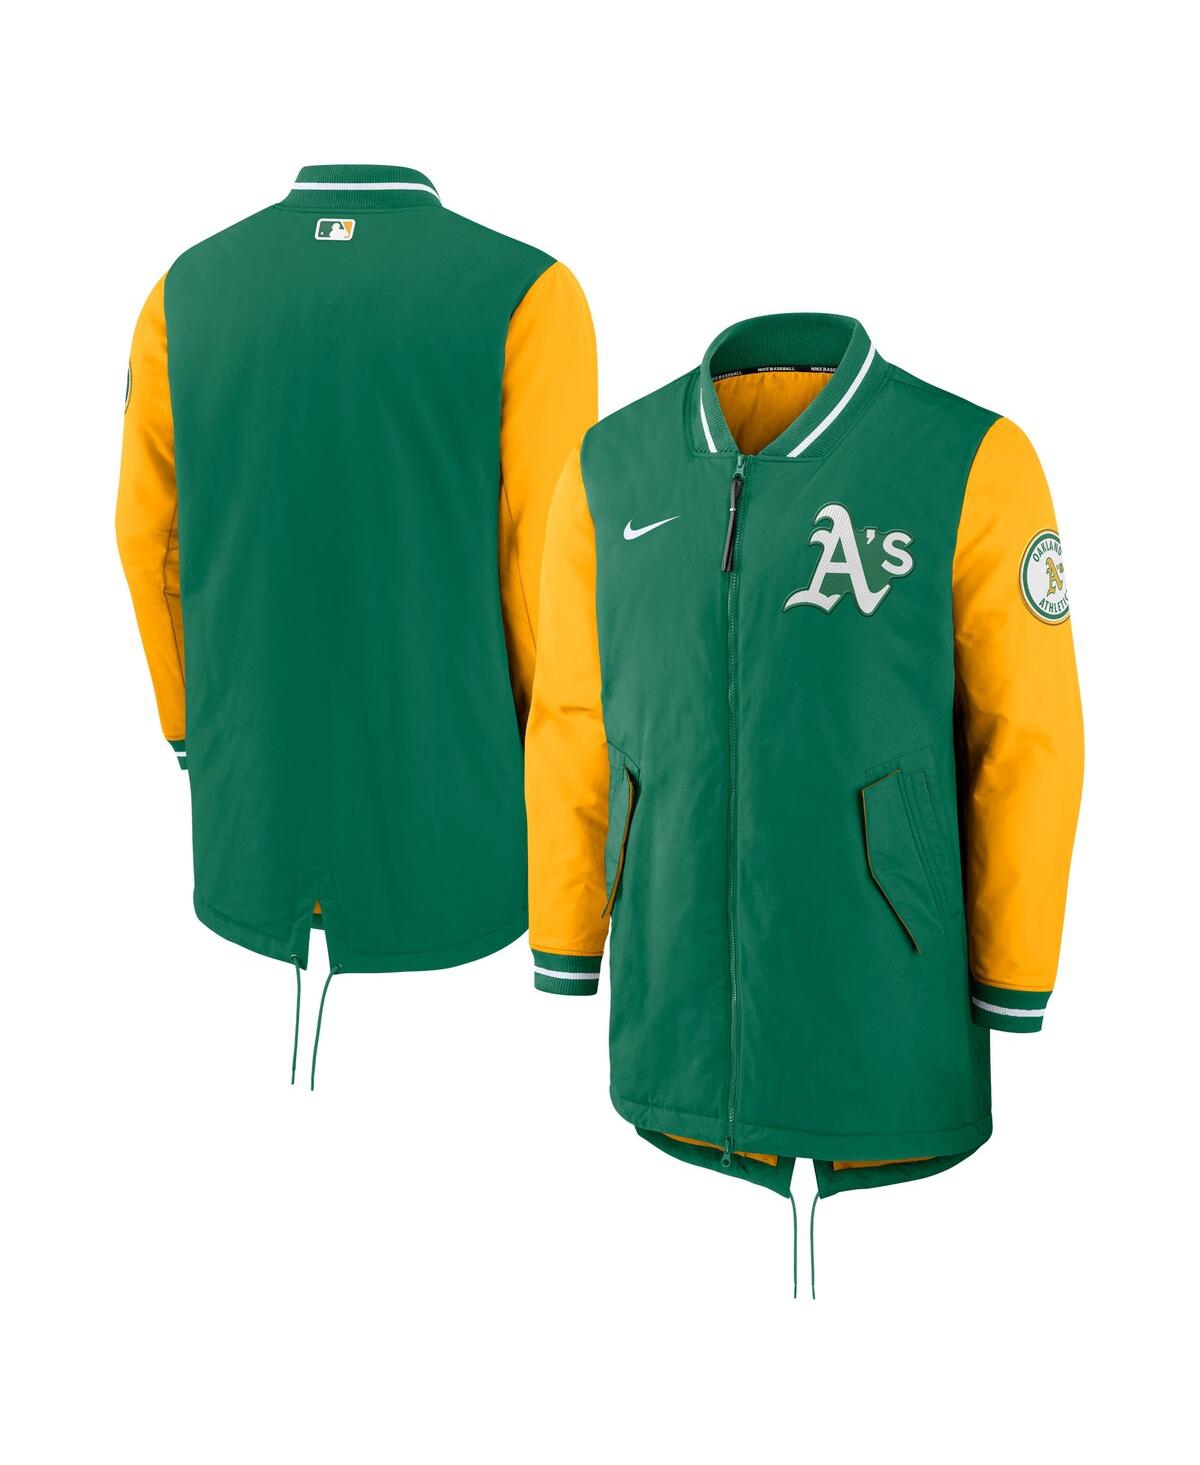 Shop Nike Men's  Green Oakland Athletics Authentic Collection Dugout Performance Full-zip Jacket